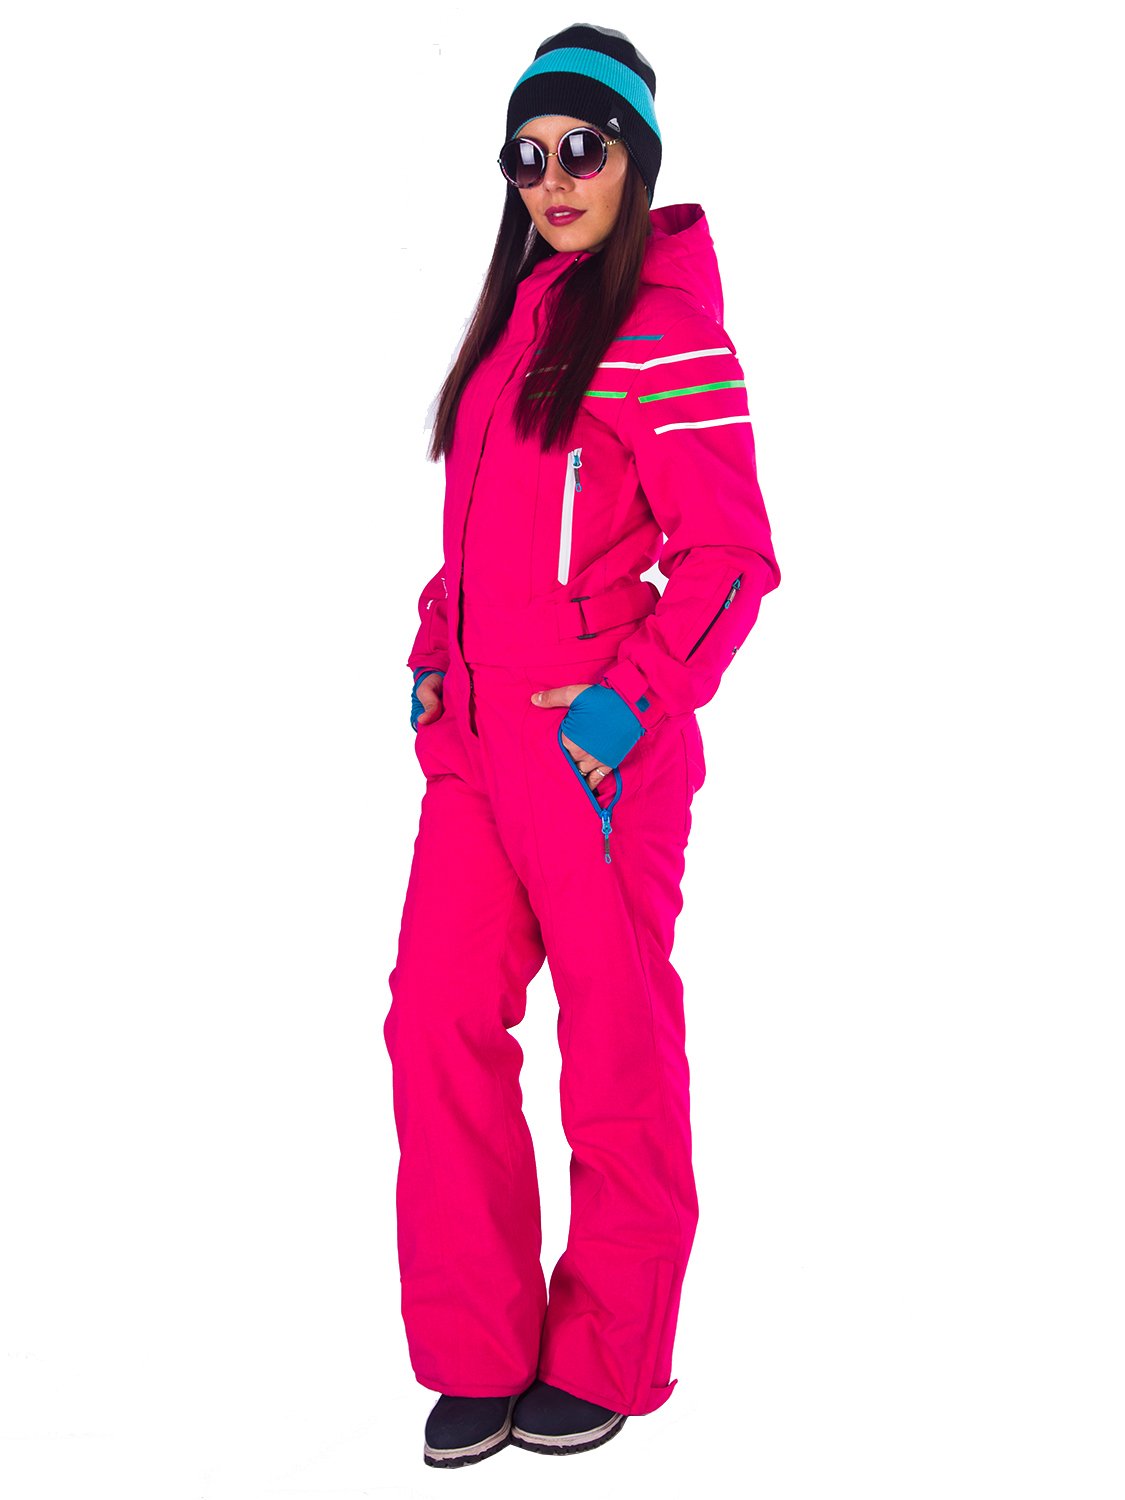 Winter ski overalls women » Wallpapers and Images